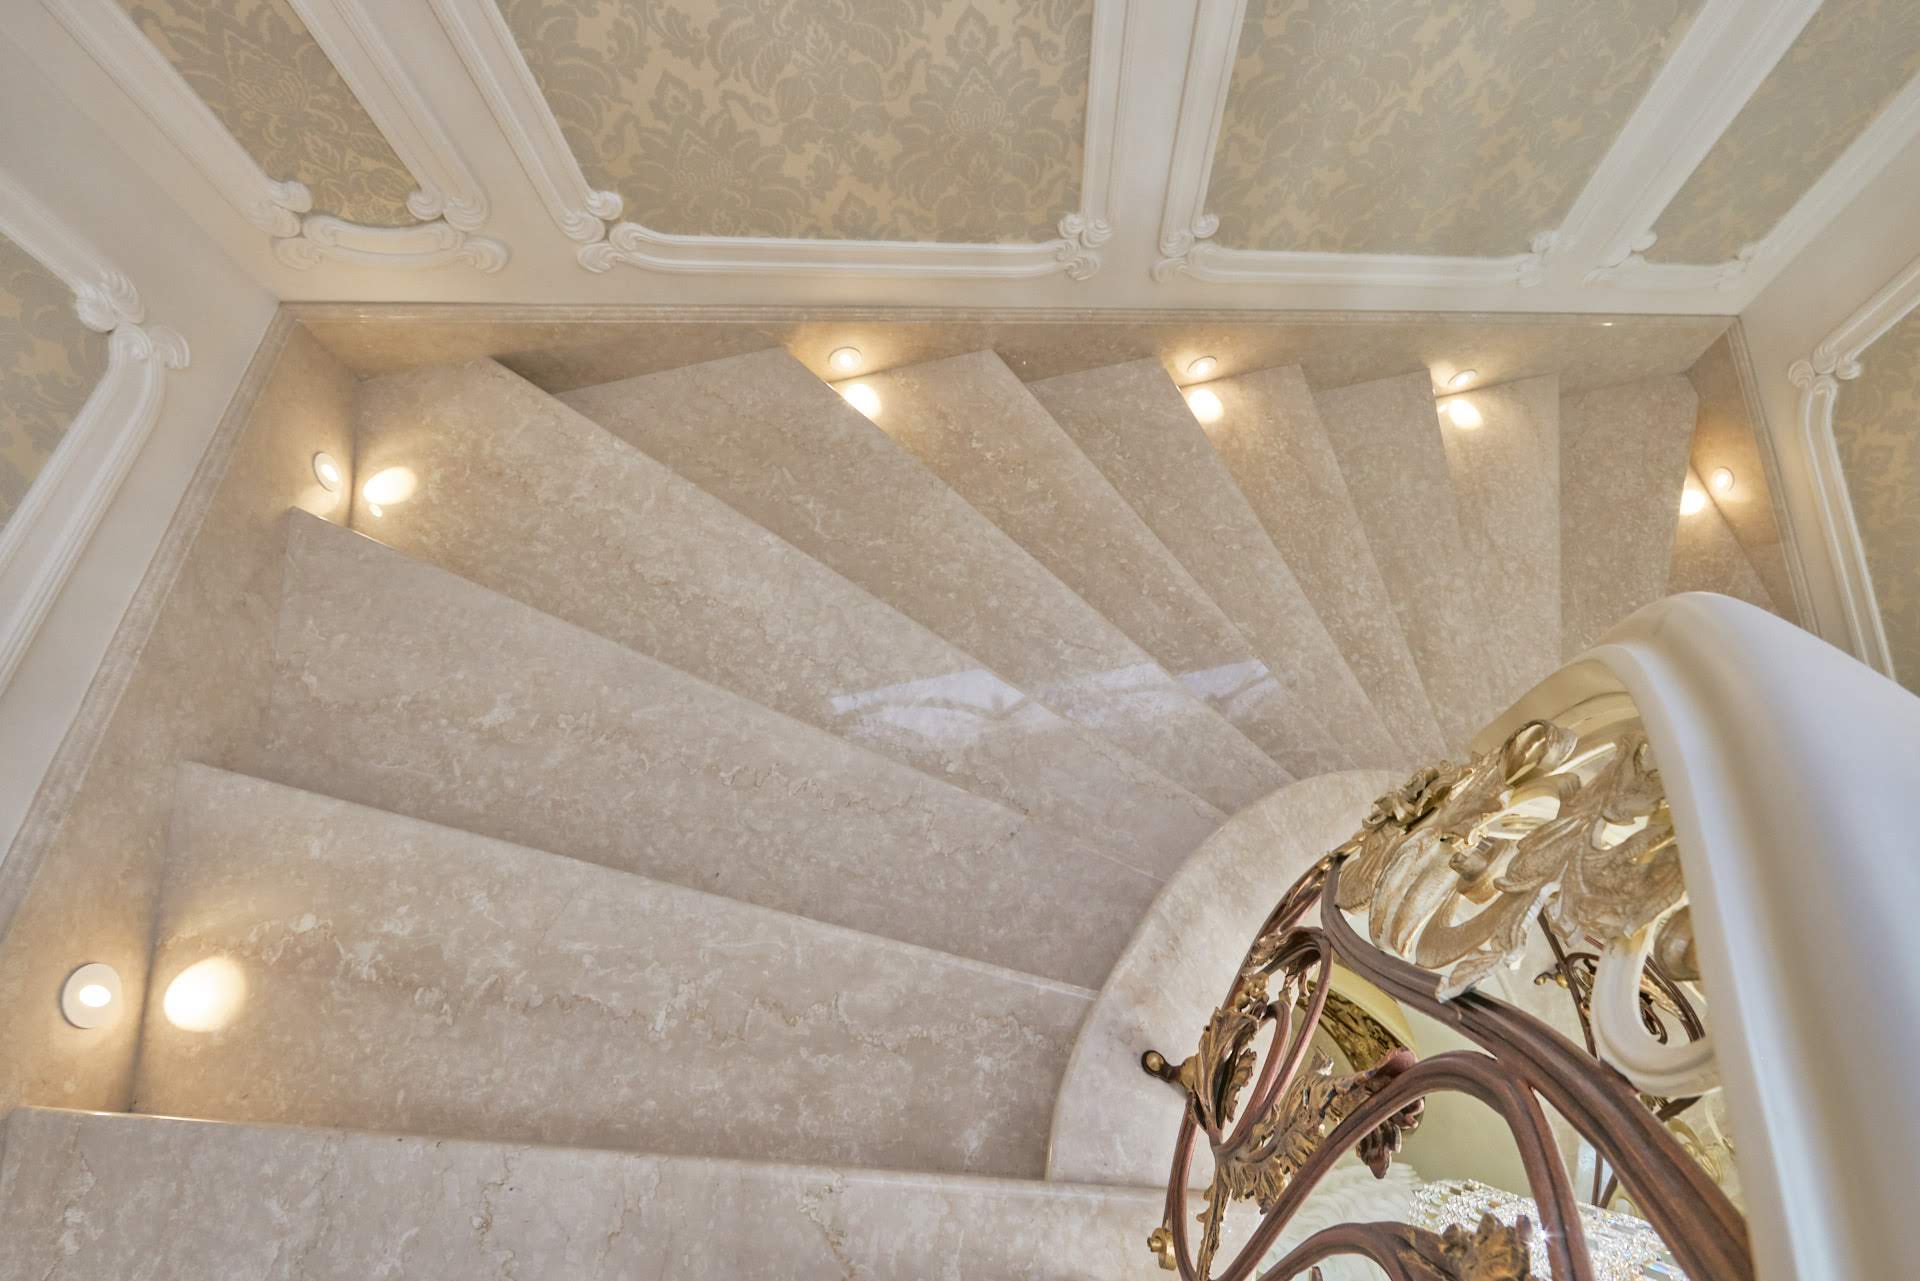 Staircase in a classic interior